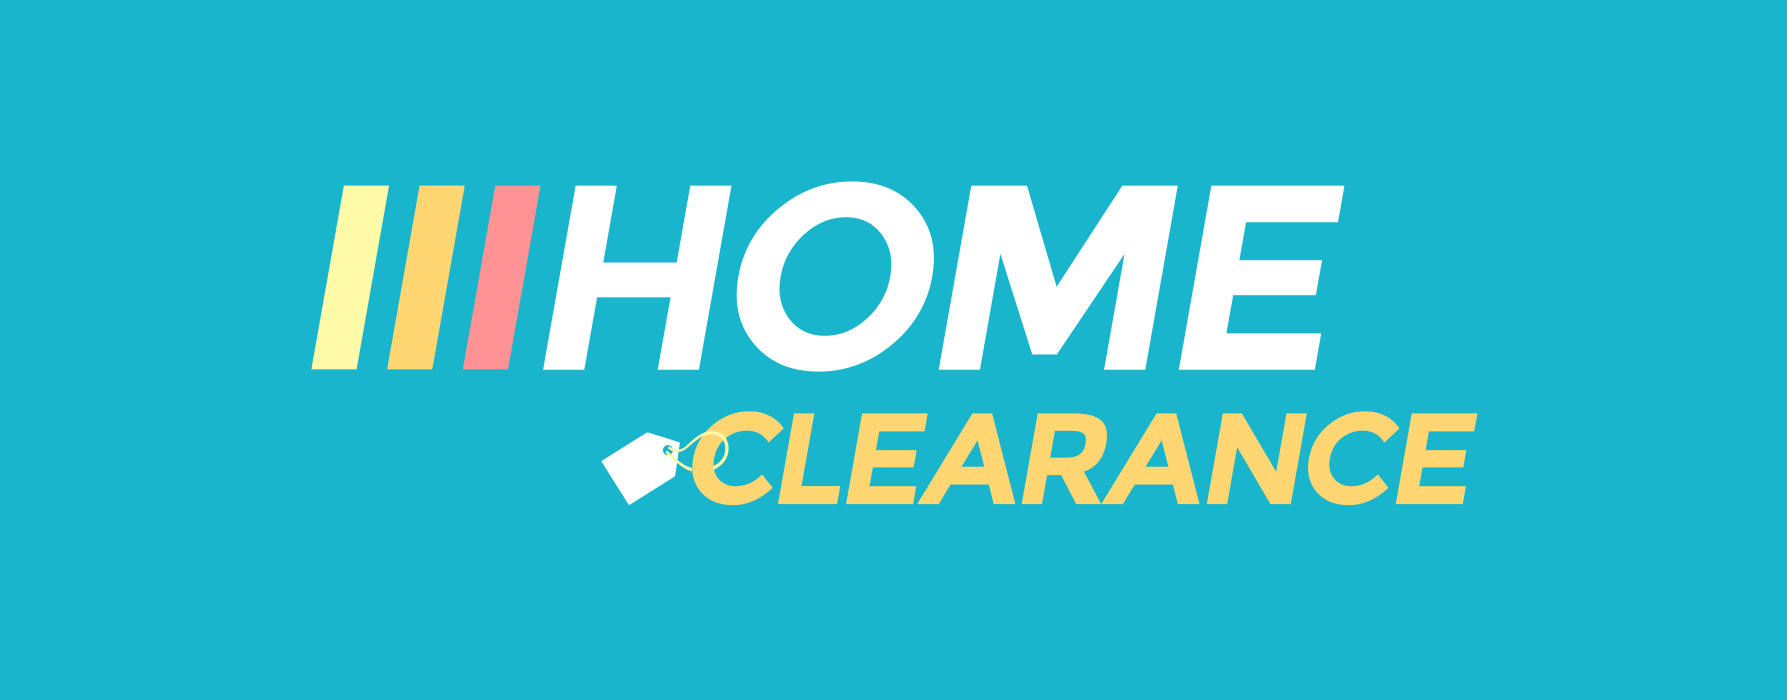 All Home Clearance Australia Deals & Promotions